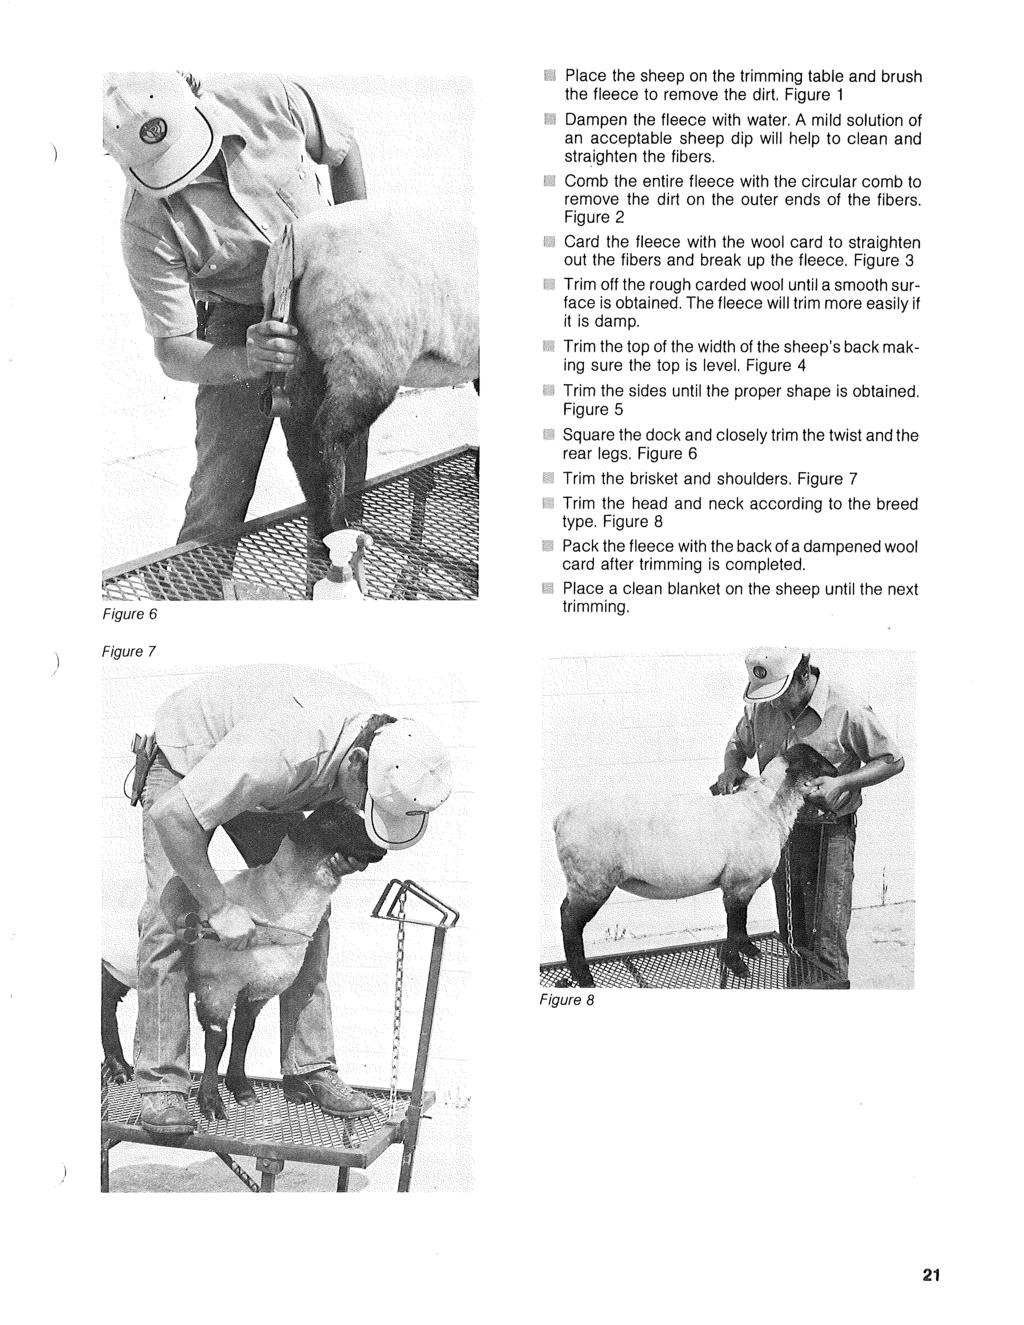 Figure 6 Place the sheep on the trimming table and brush the fleece to remove the dirt. Figure 1 Dampen the fleece with water.